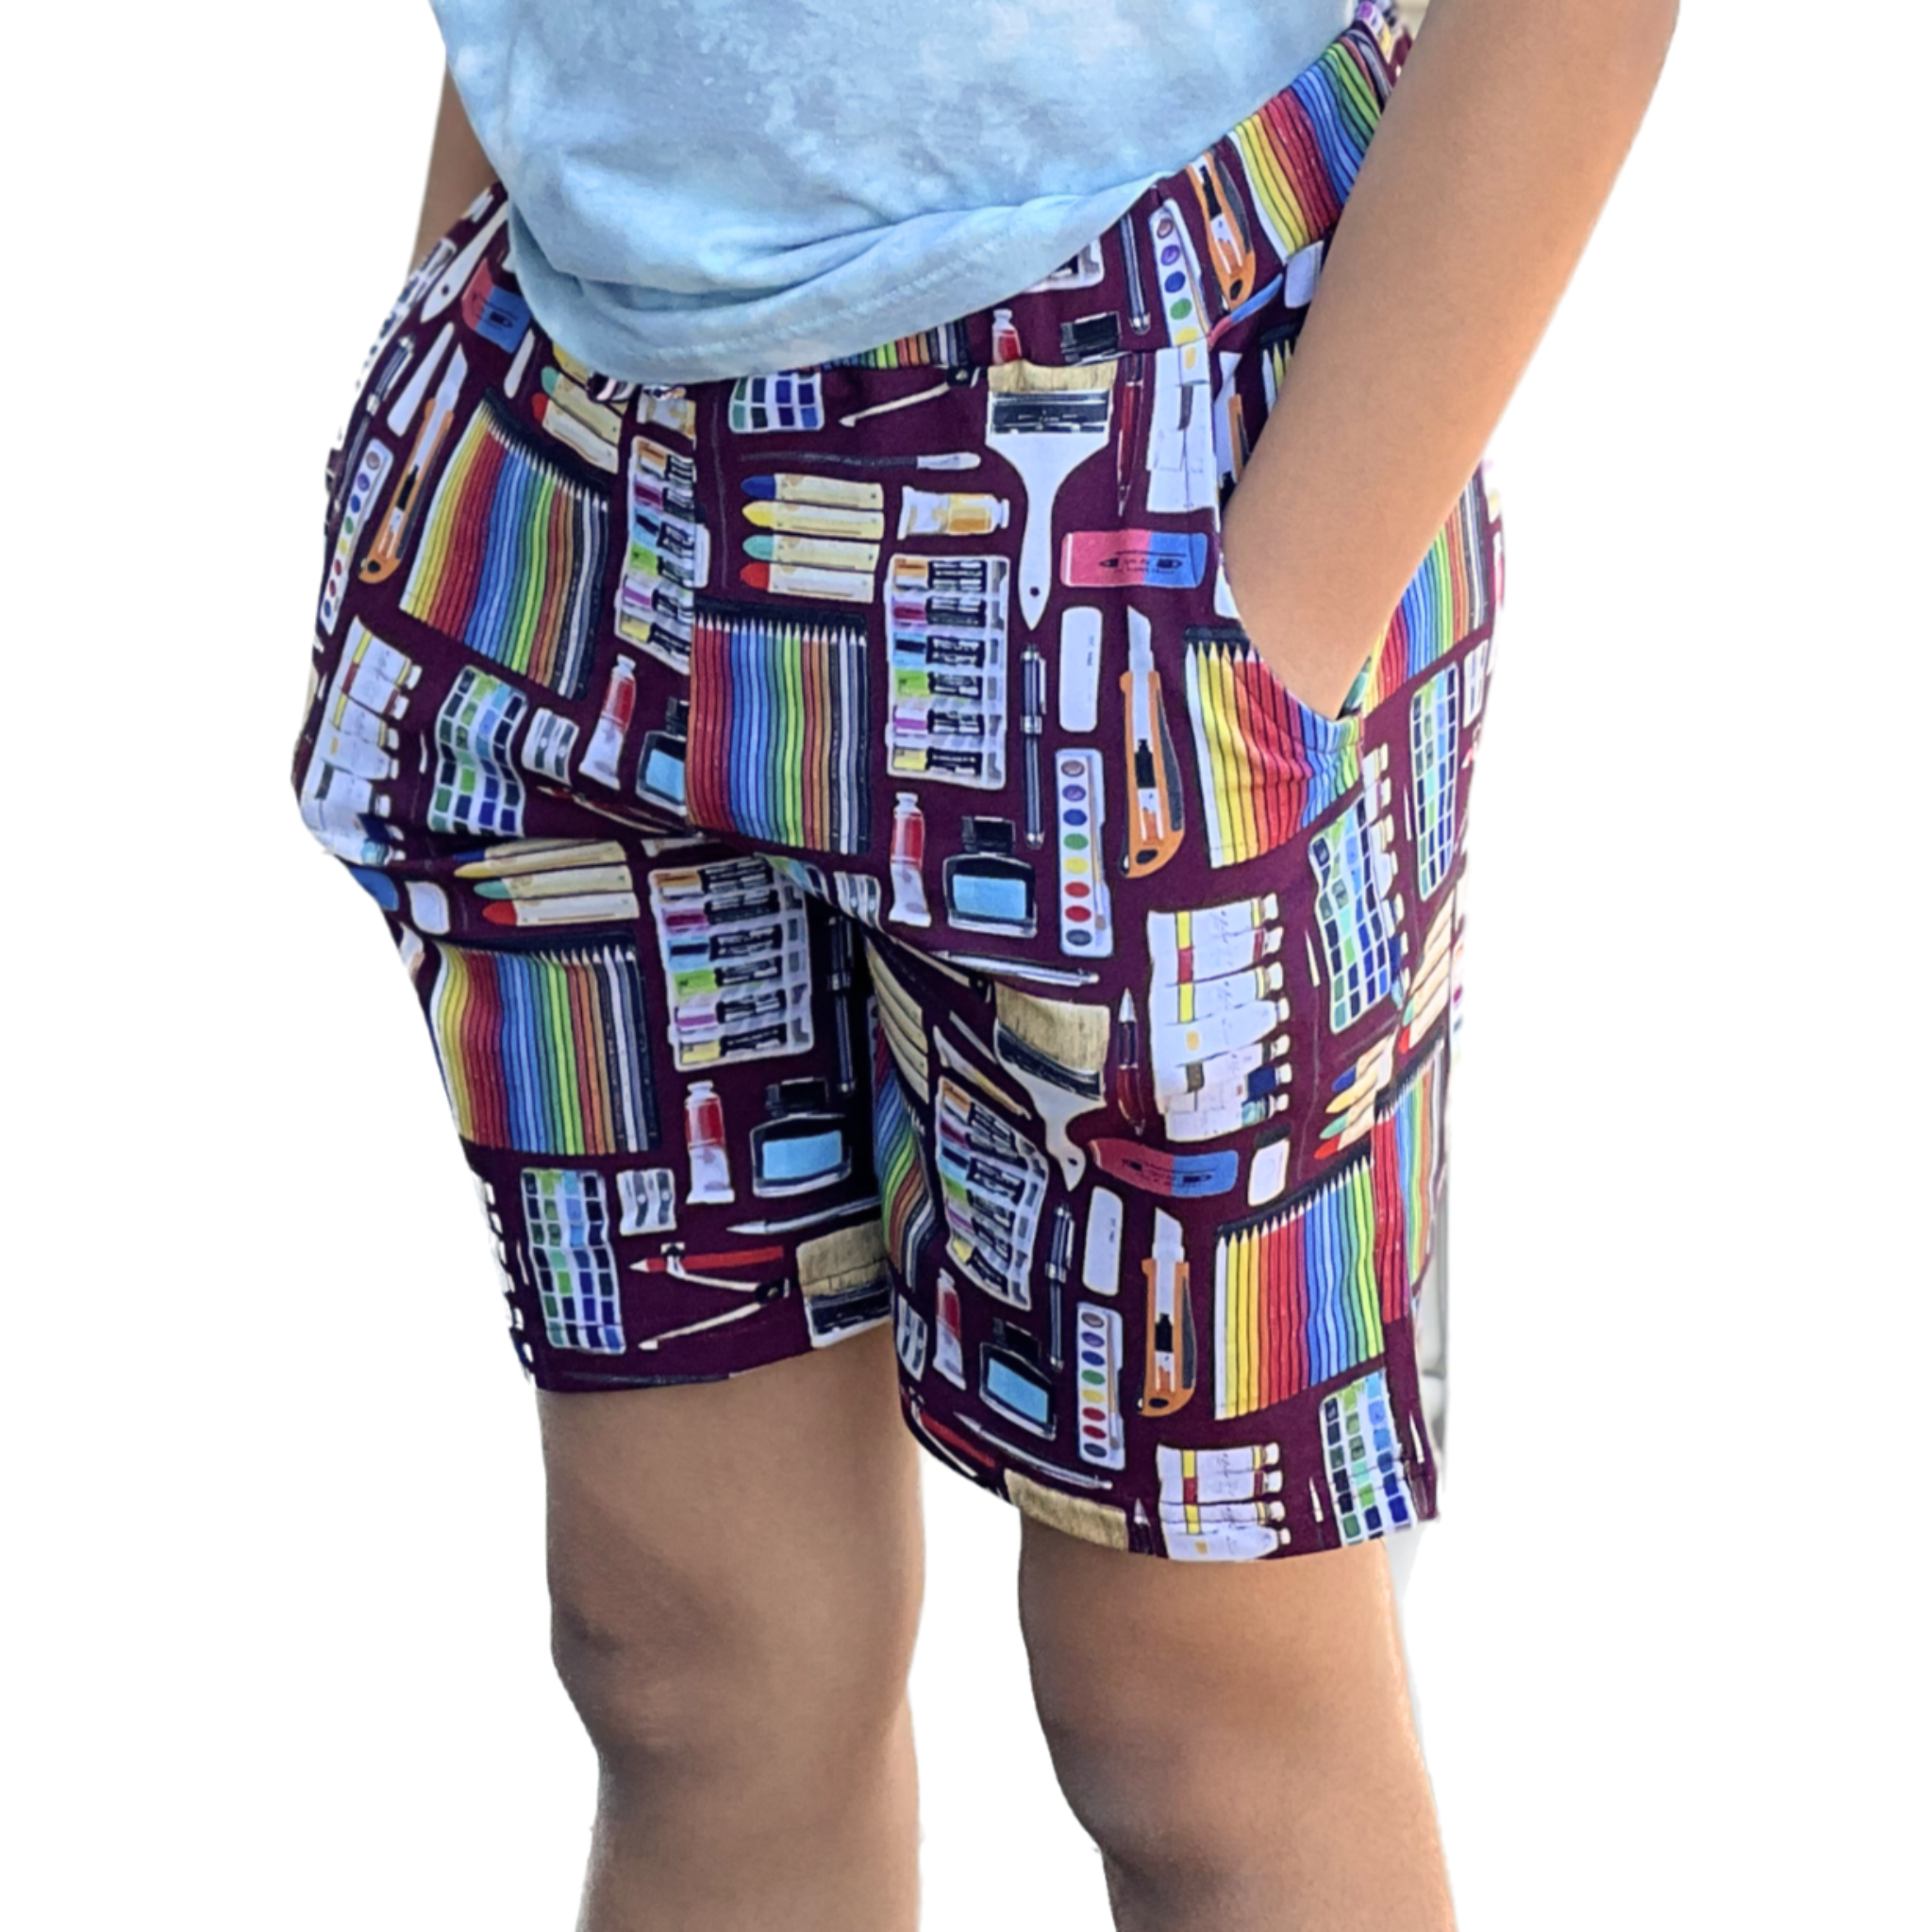 Art Supplies Kids Shorts with Pockets